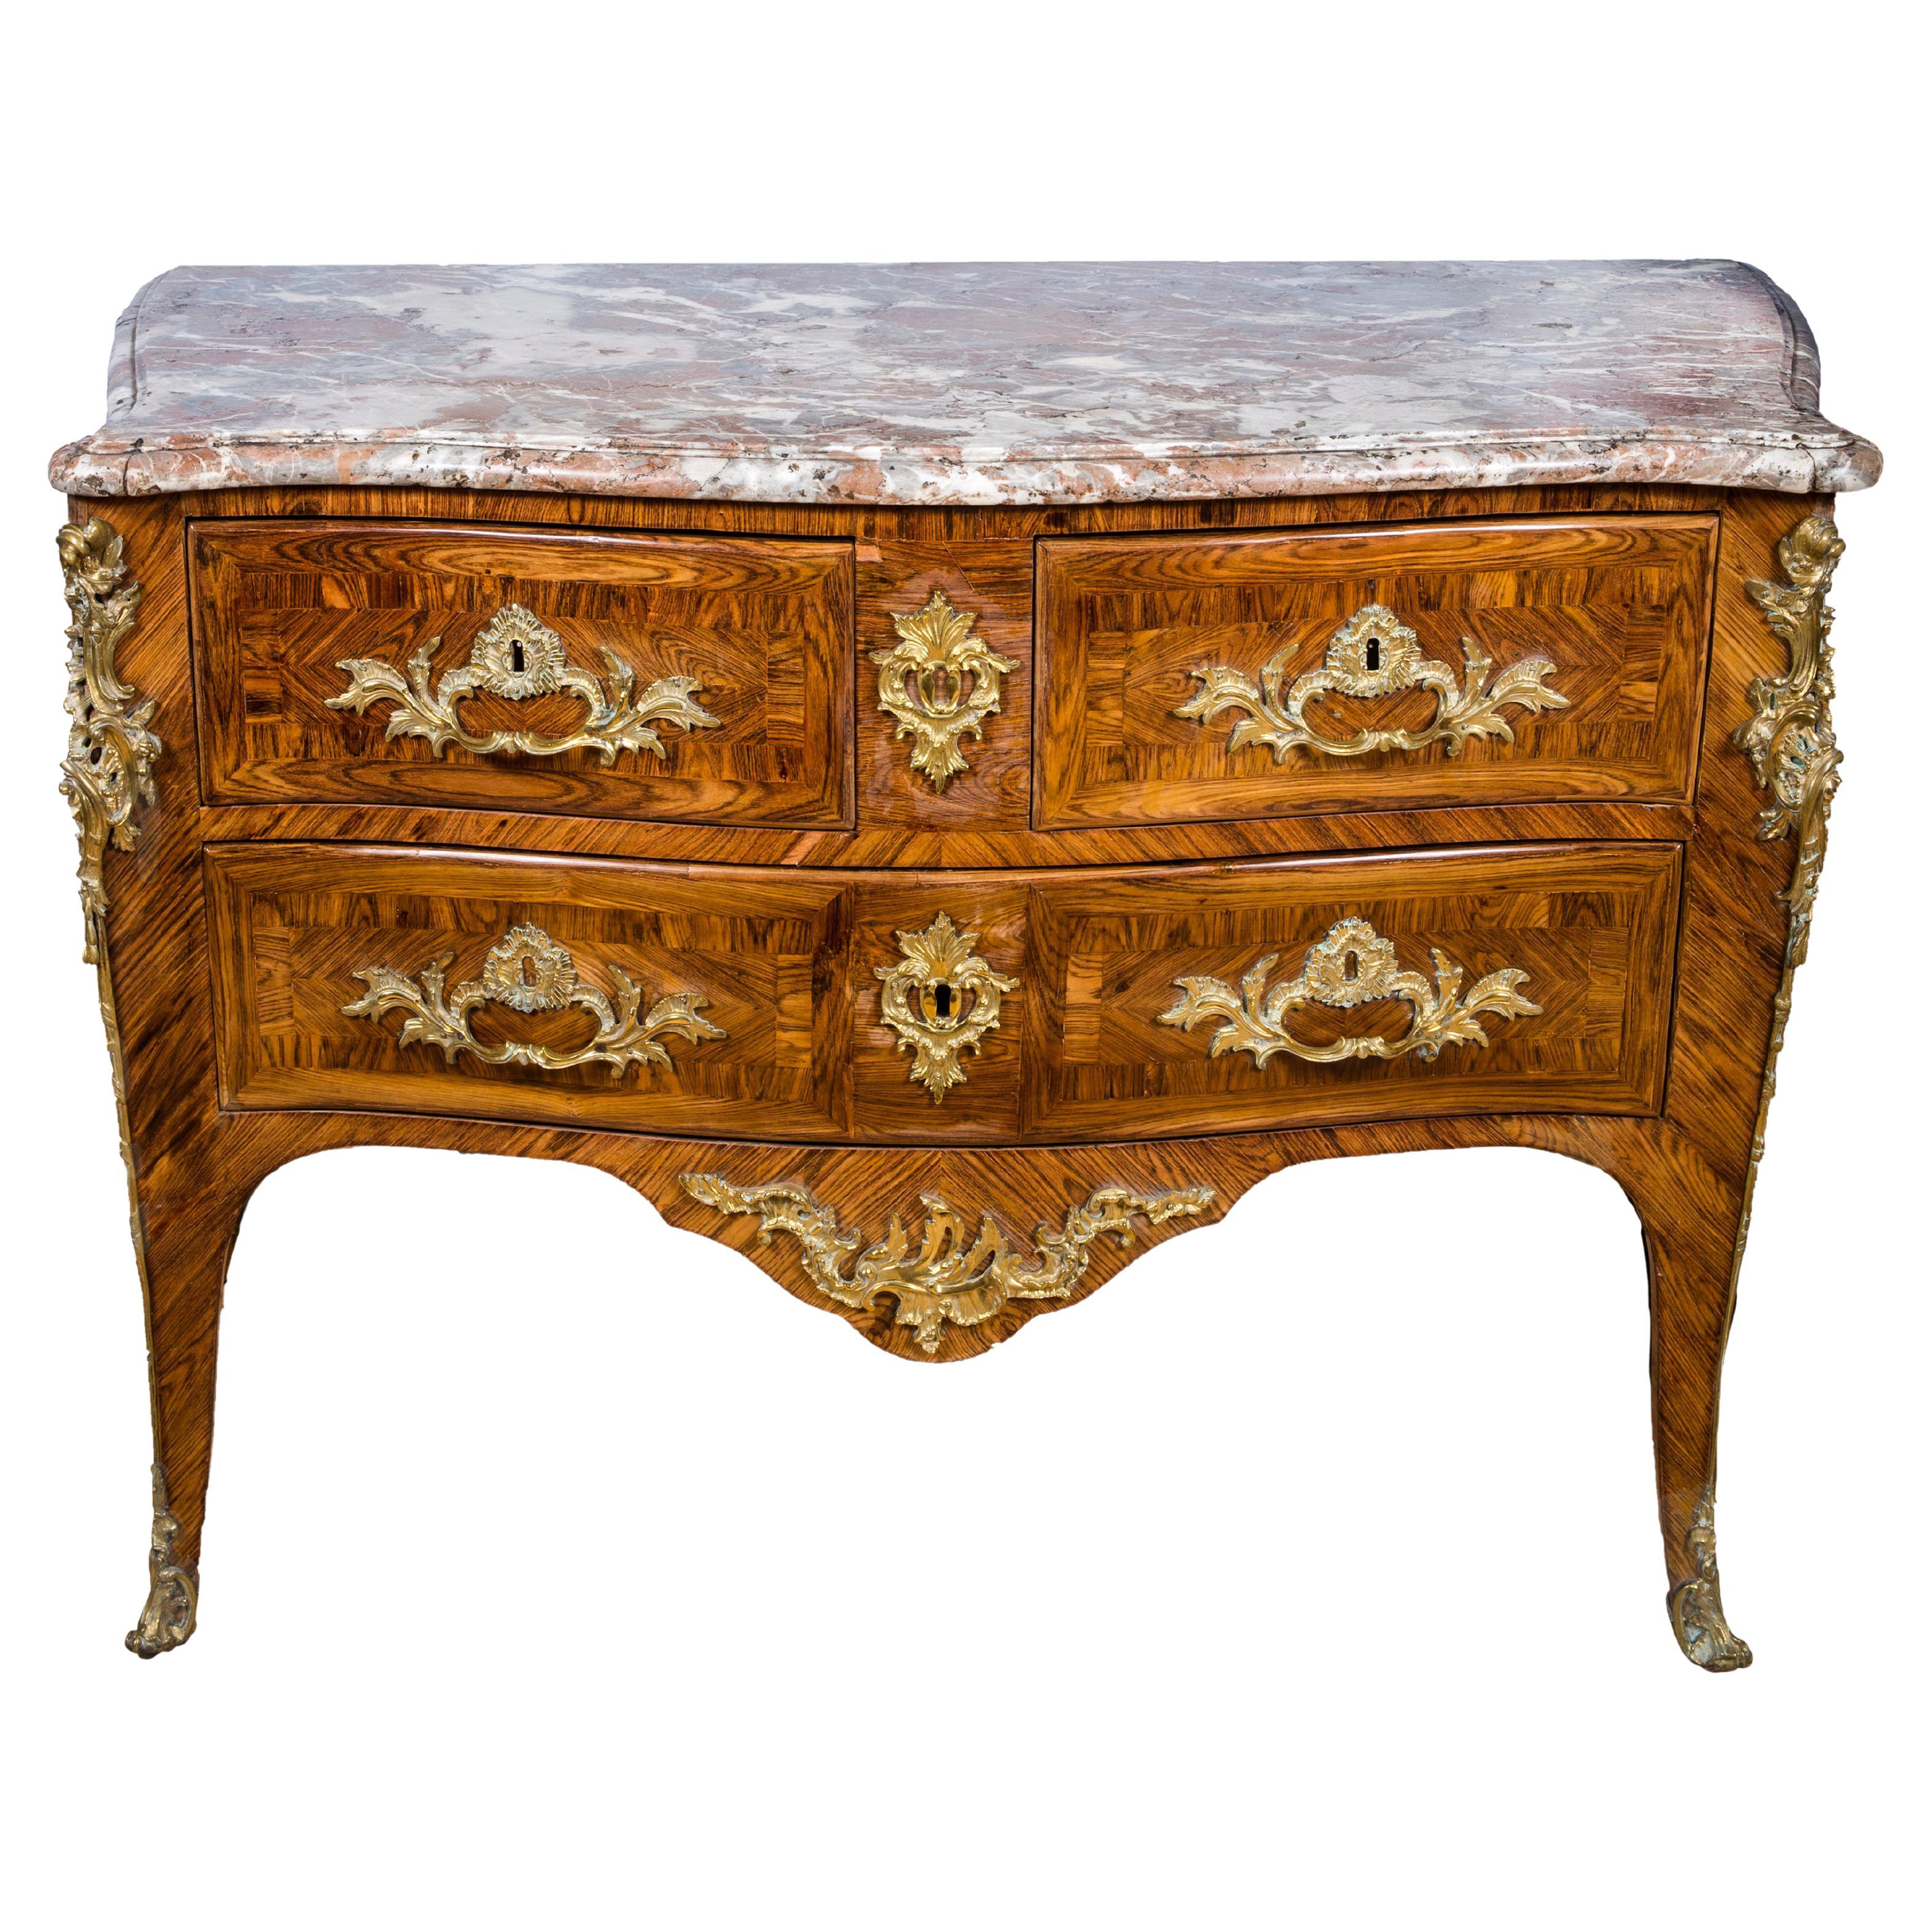 Early Louis XV Ormolu-Mounted Kingwood Commode by Nicolas Jean Marchand For Sale